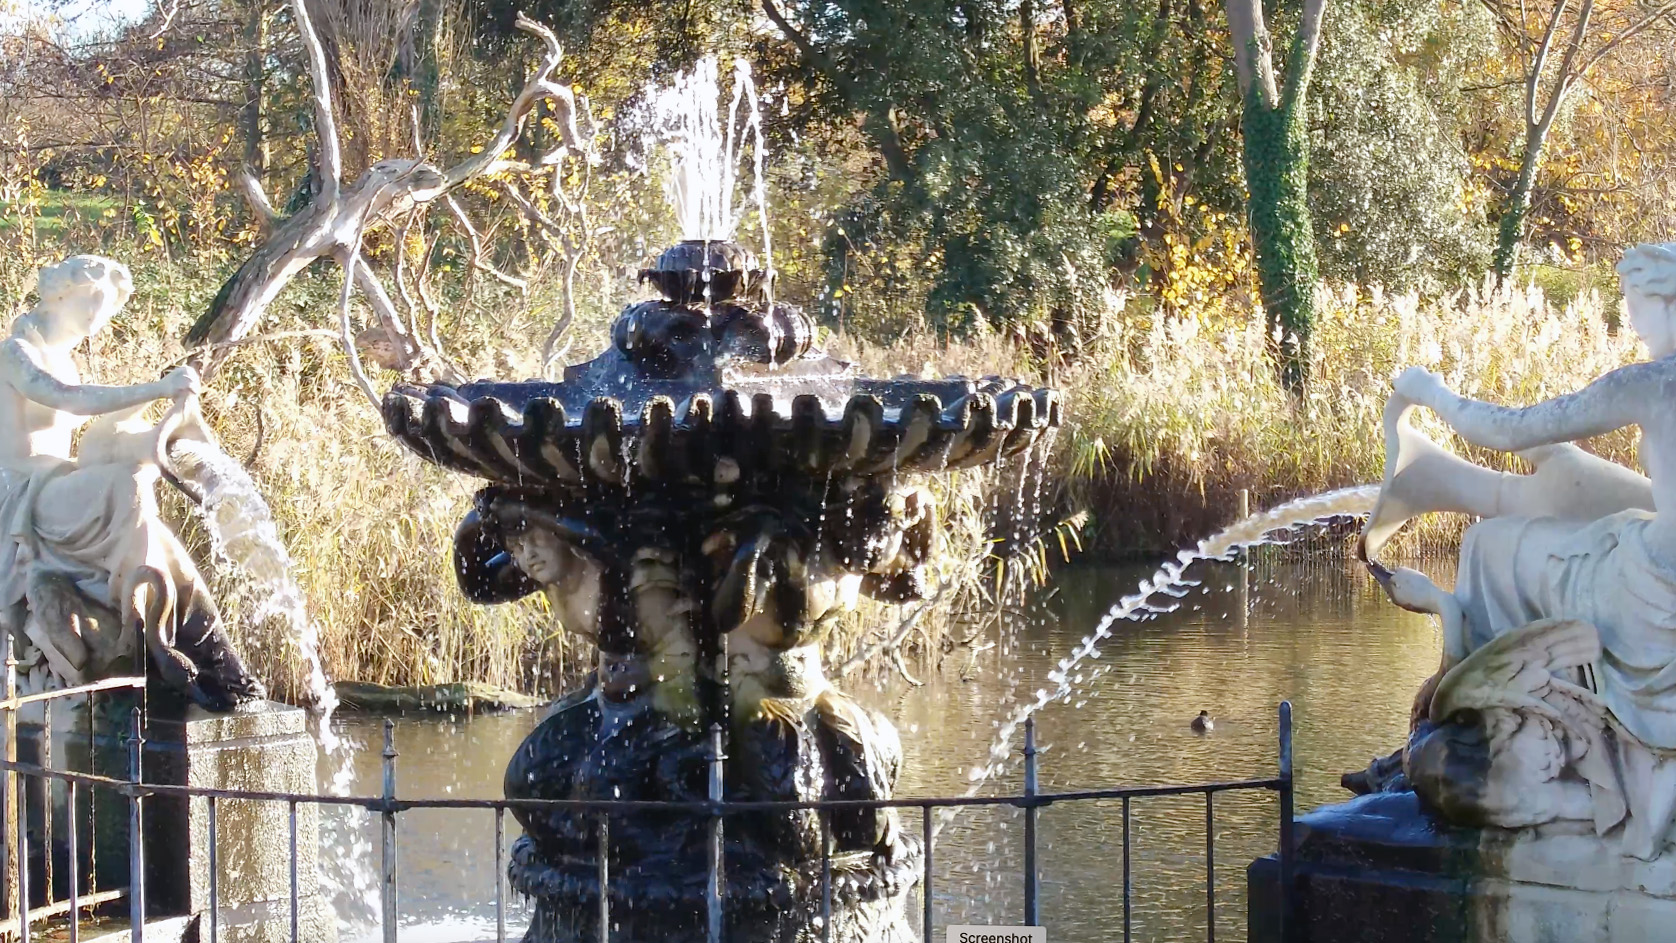 Slow motion capture of fountain in the Italian Garden Kensington from This Video Works 2022 showreel